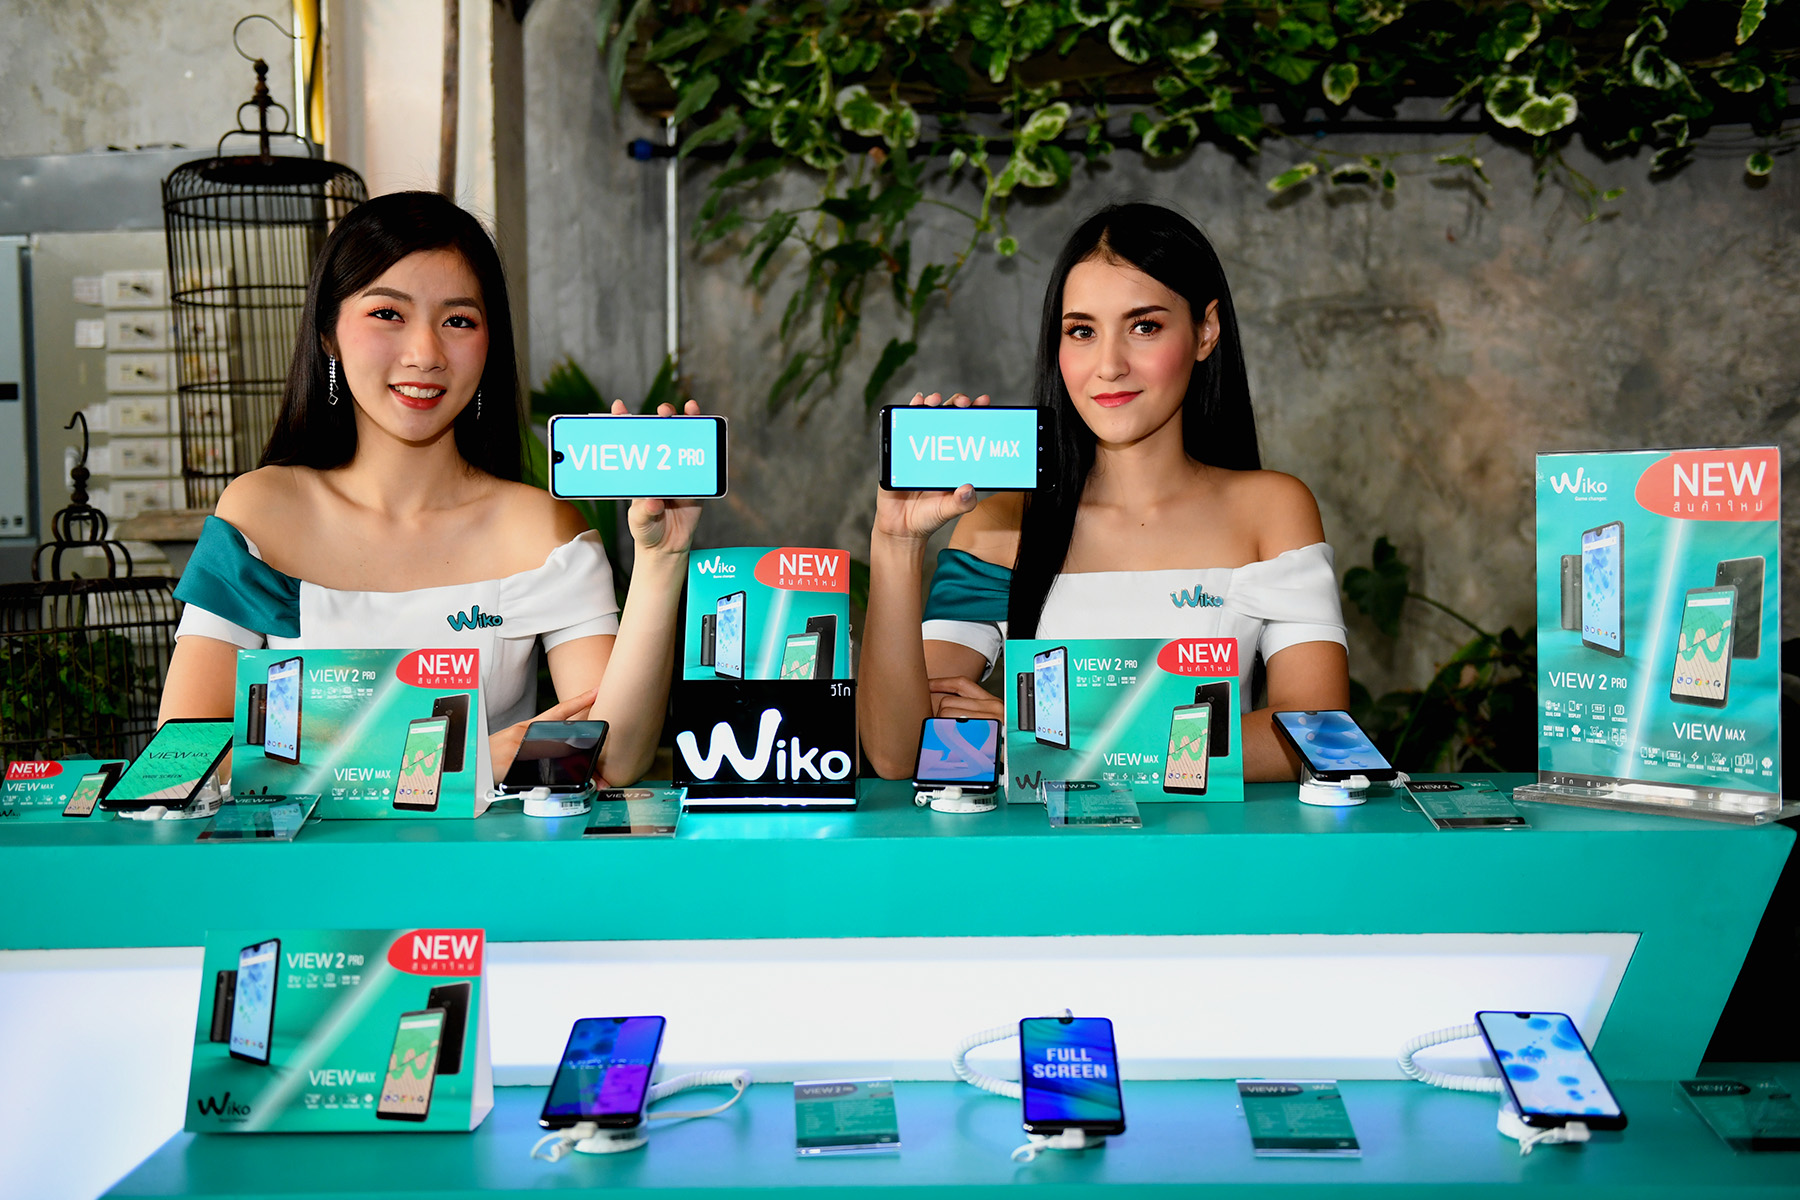 Wiko View2 Pro and Wiko View Max